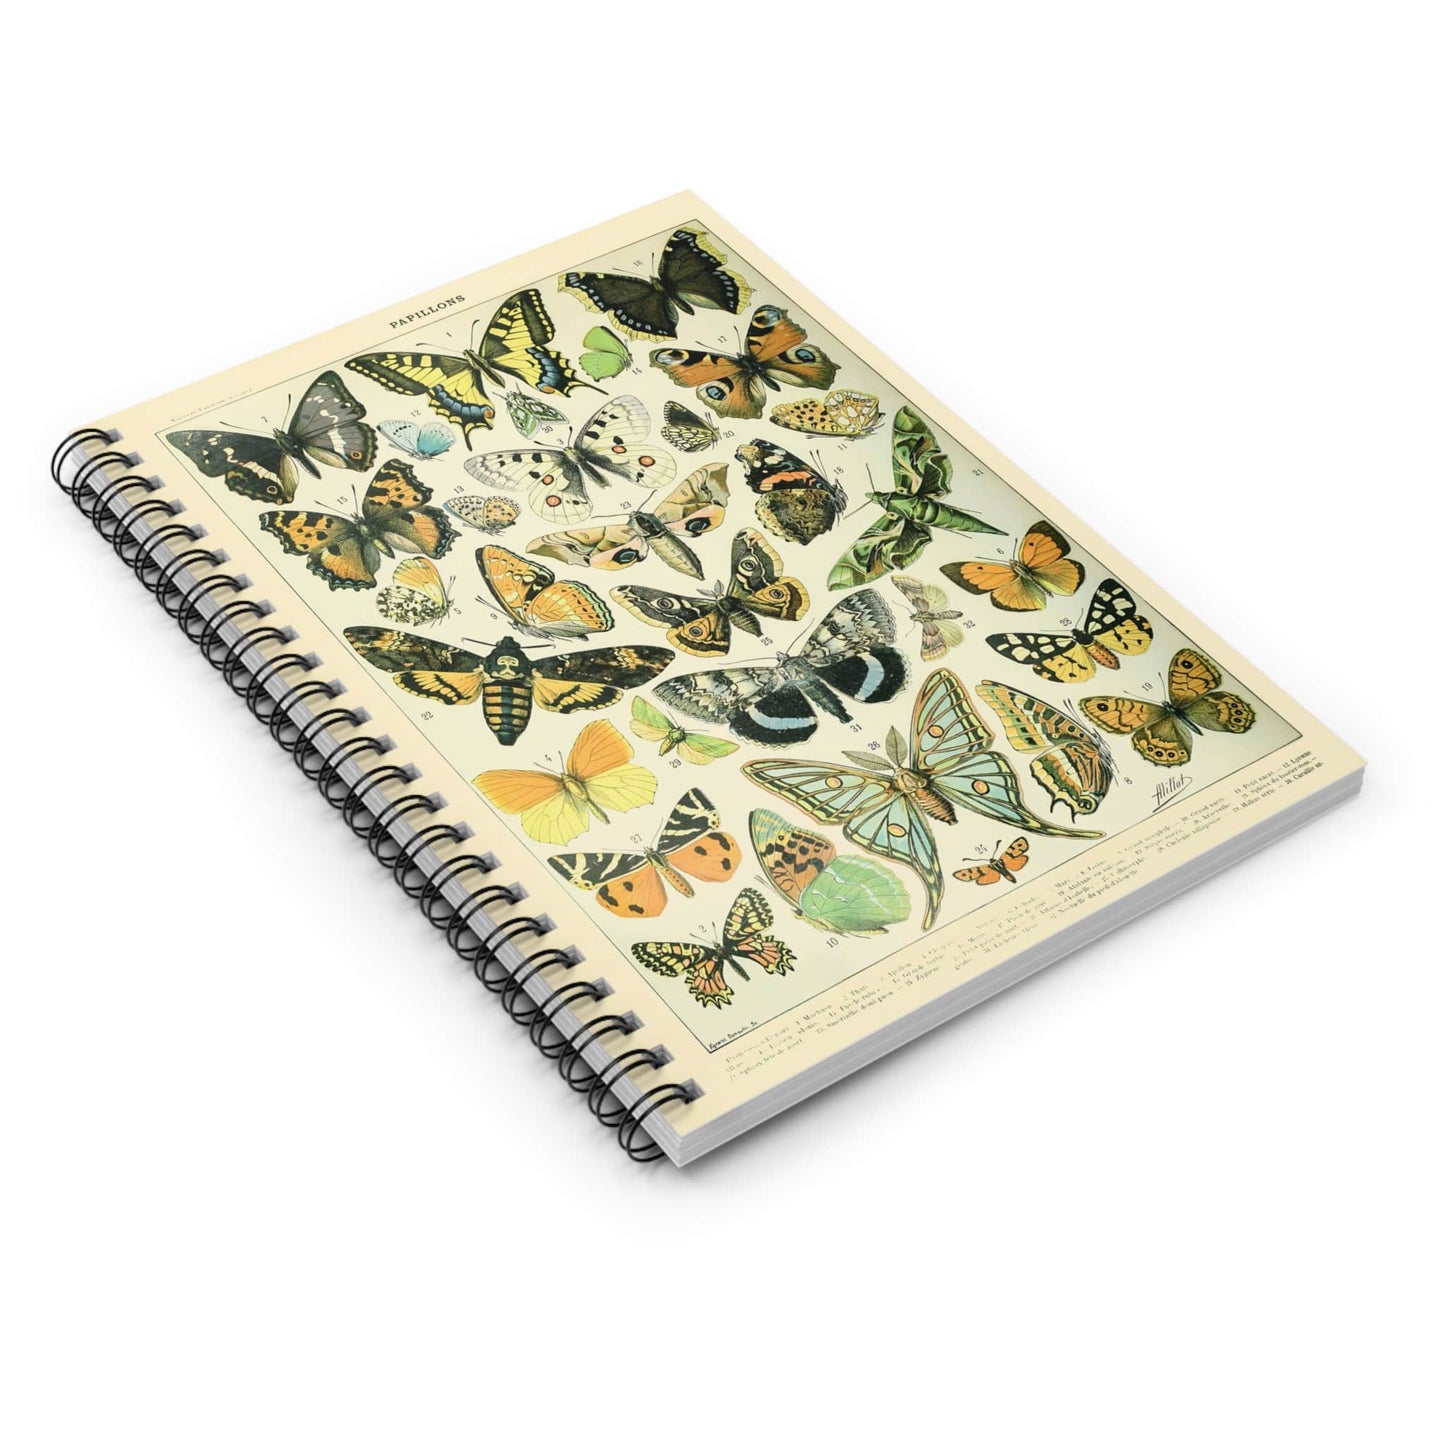 Butterflies Spiral Notebook Laying Flat on White Surface